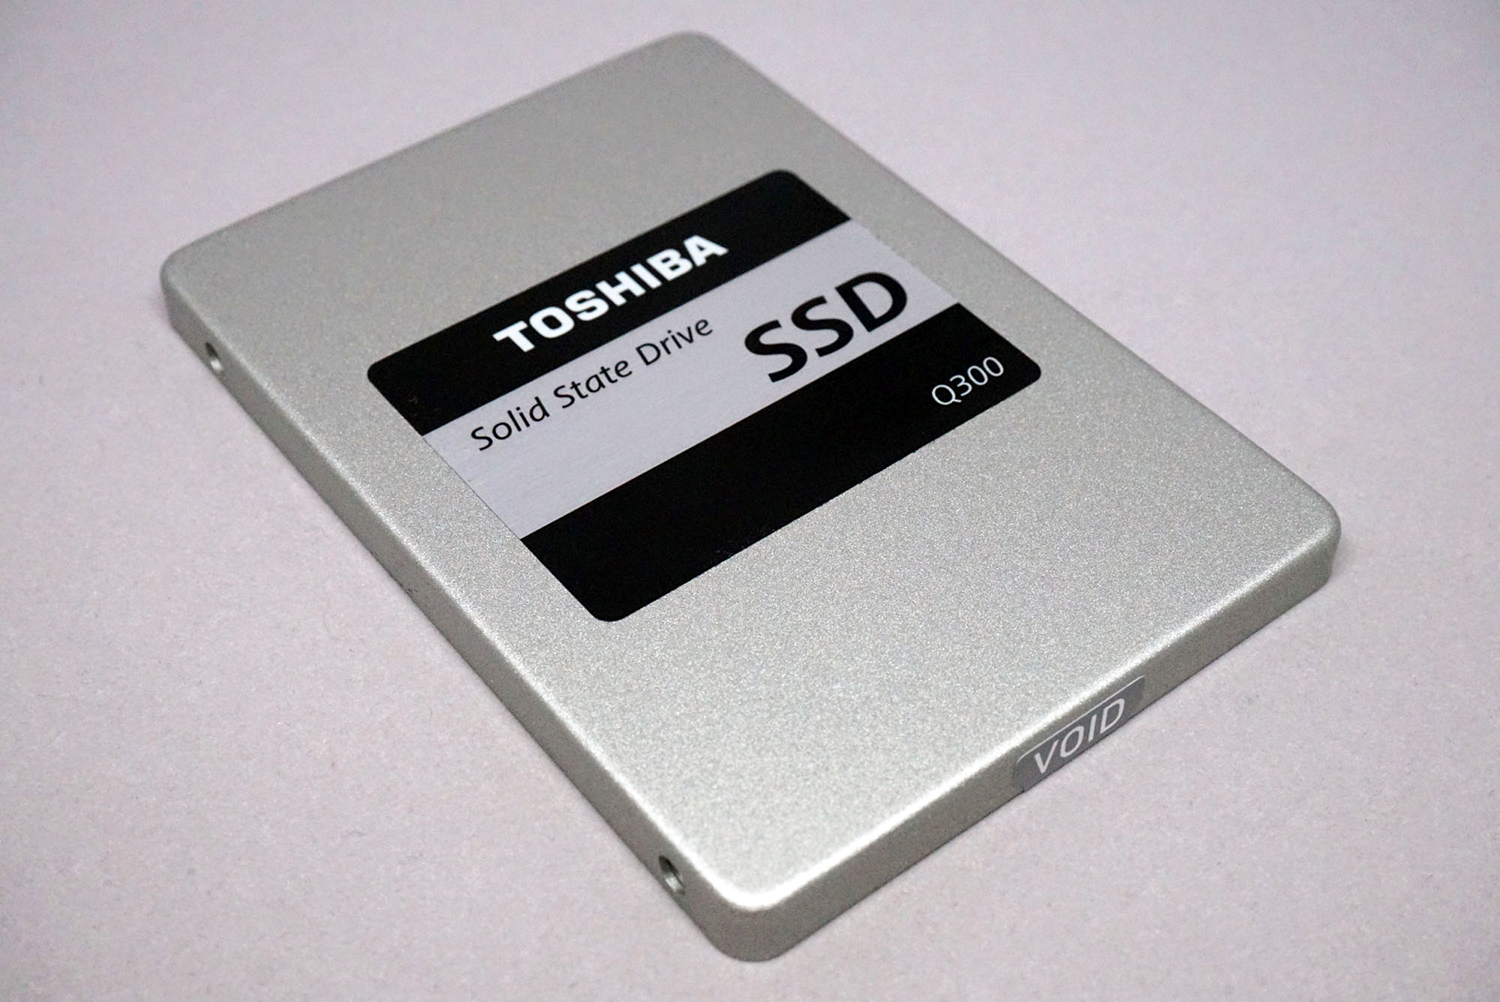 broadcast Steer Troubled Toshiba Q300 Review | HDTS724XZSTA Solid State Drive | Digital Trends